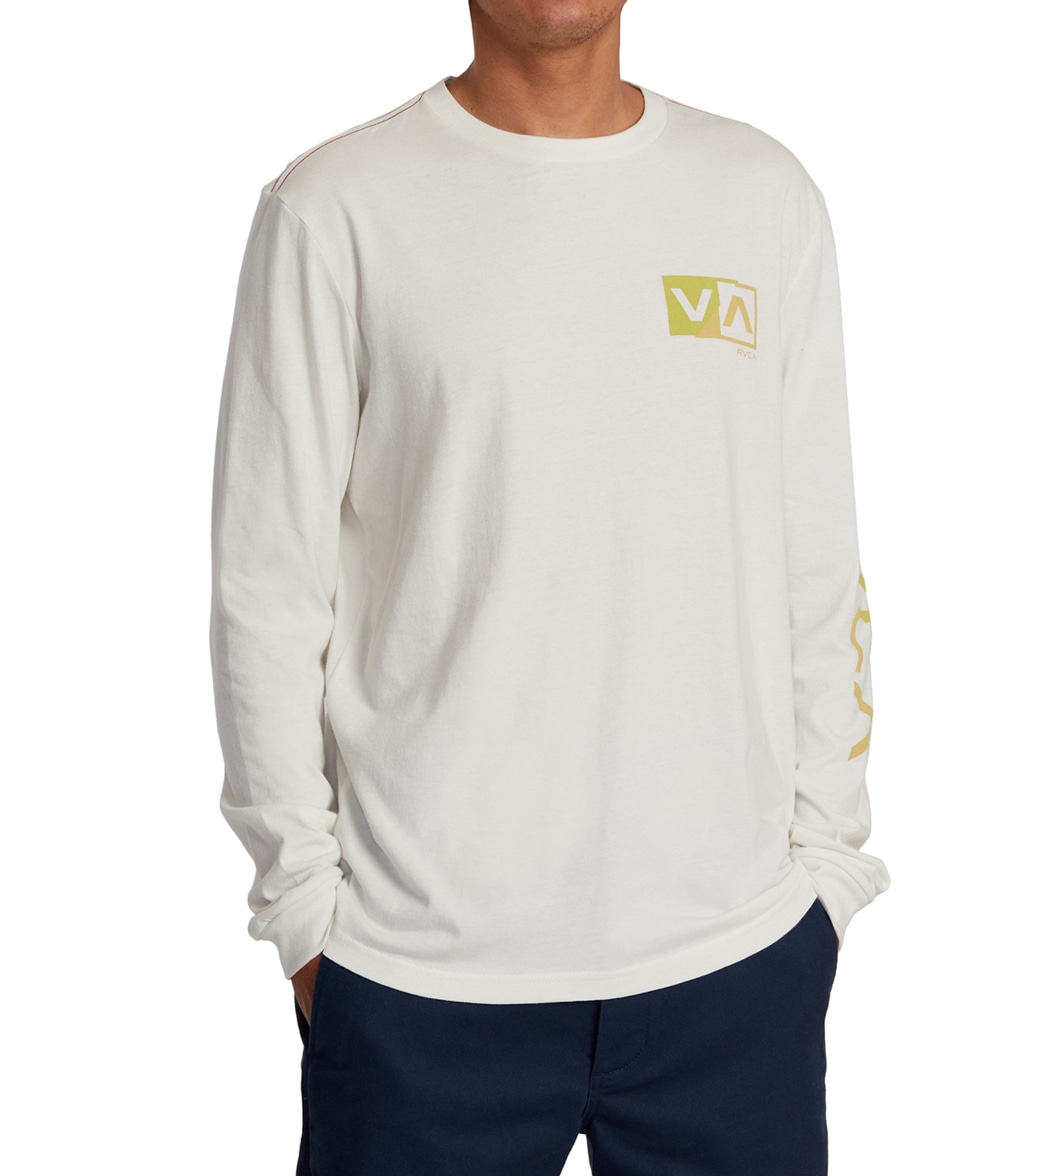 Rvca Men's Shifted Long Sleeve Tee Shirt - Antique White Large Cotton - Swimoutlet.com